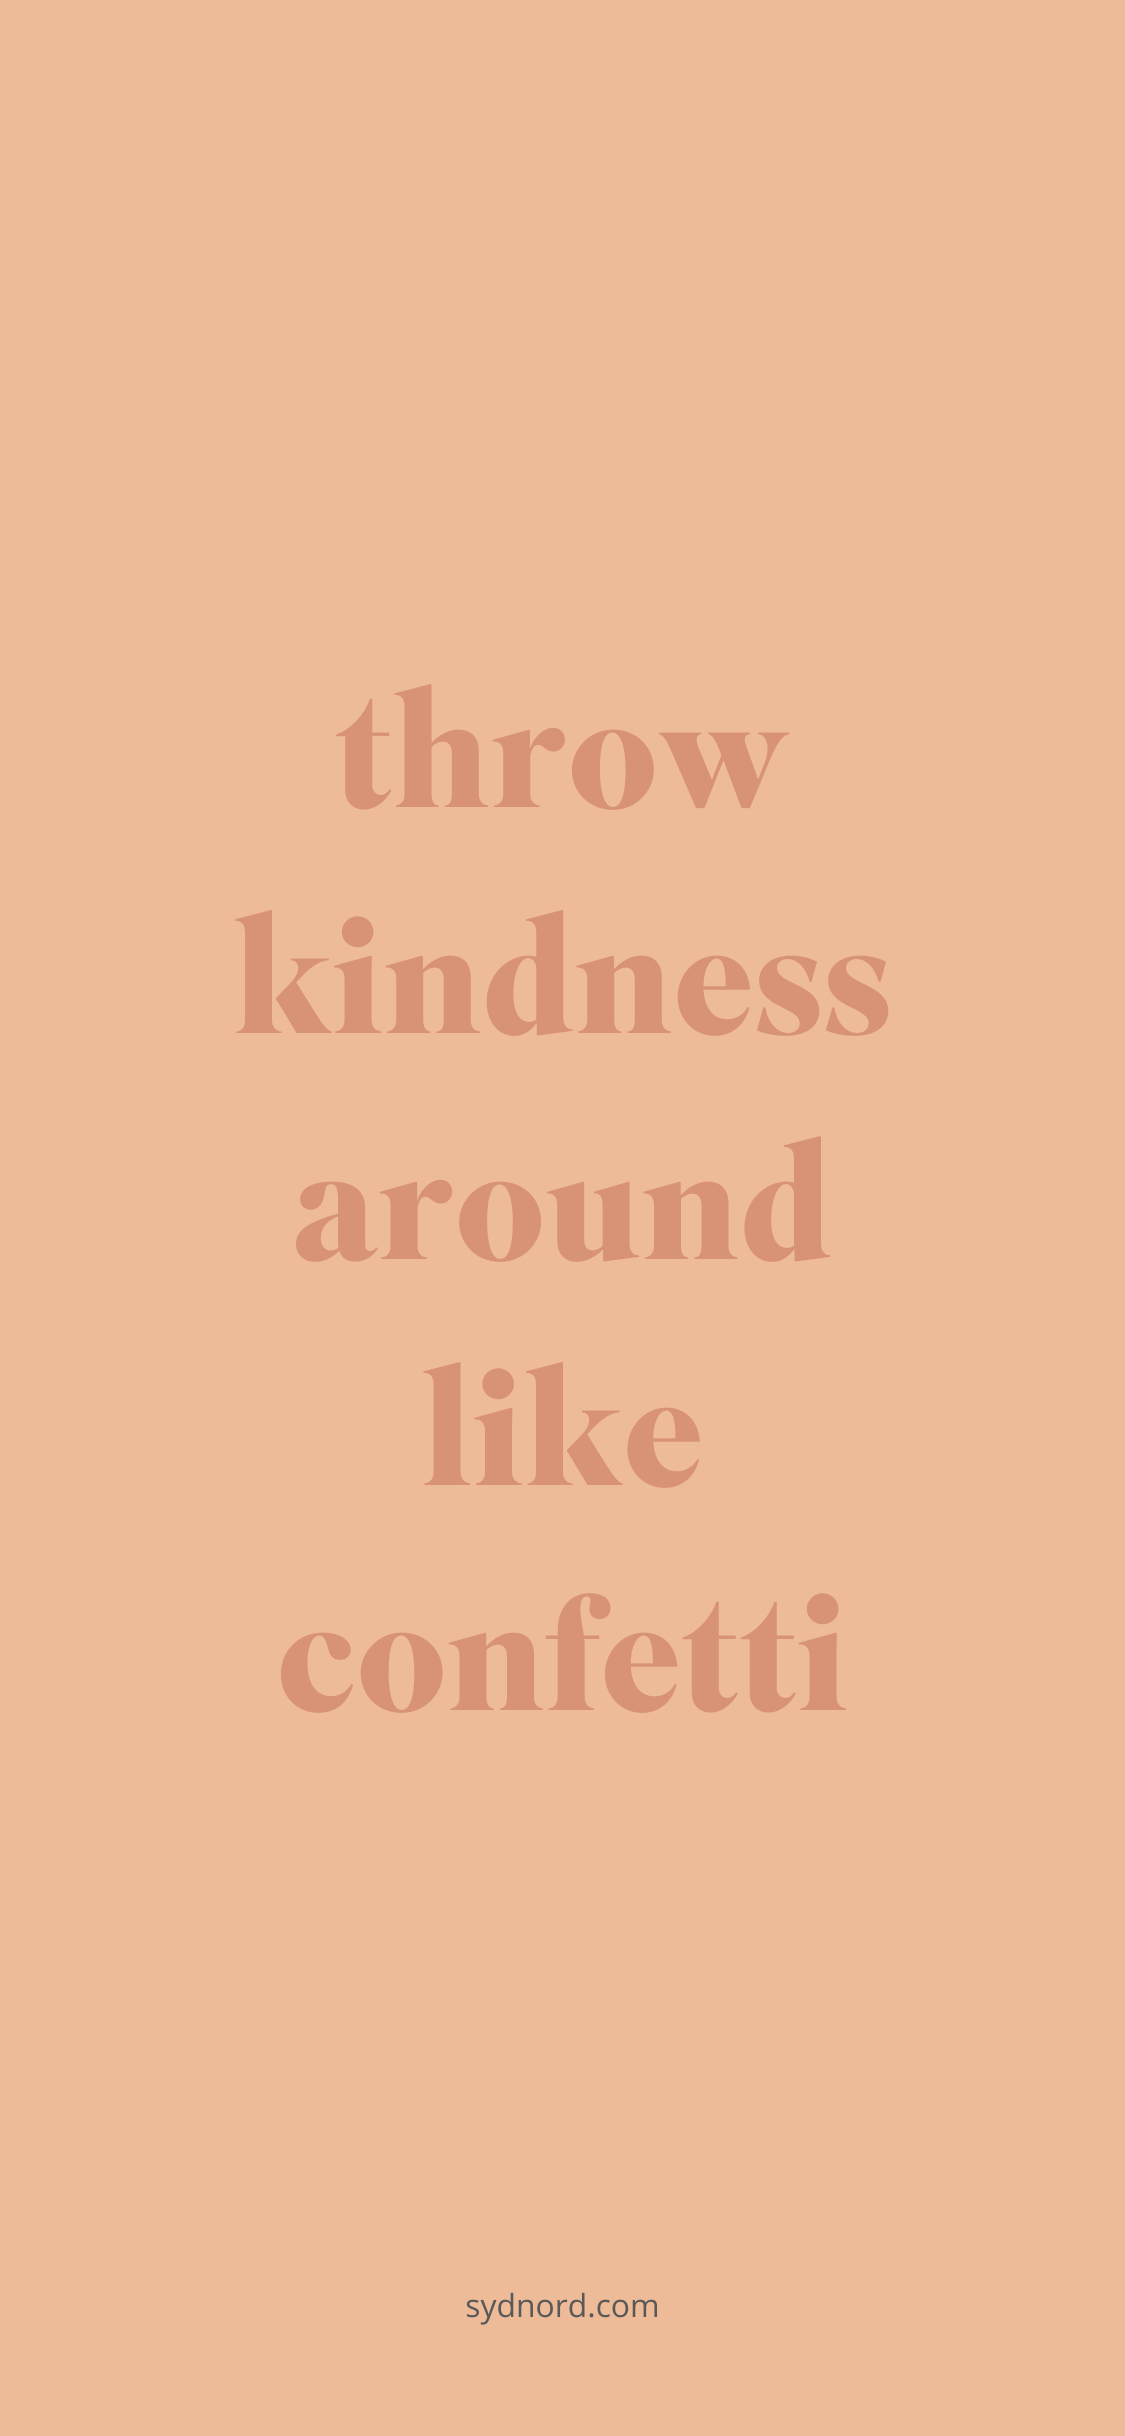 Positive quotes: Throw kindness around like confetti